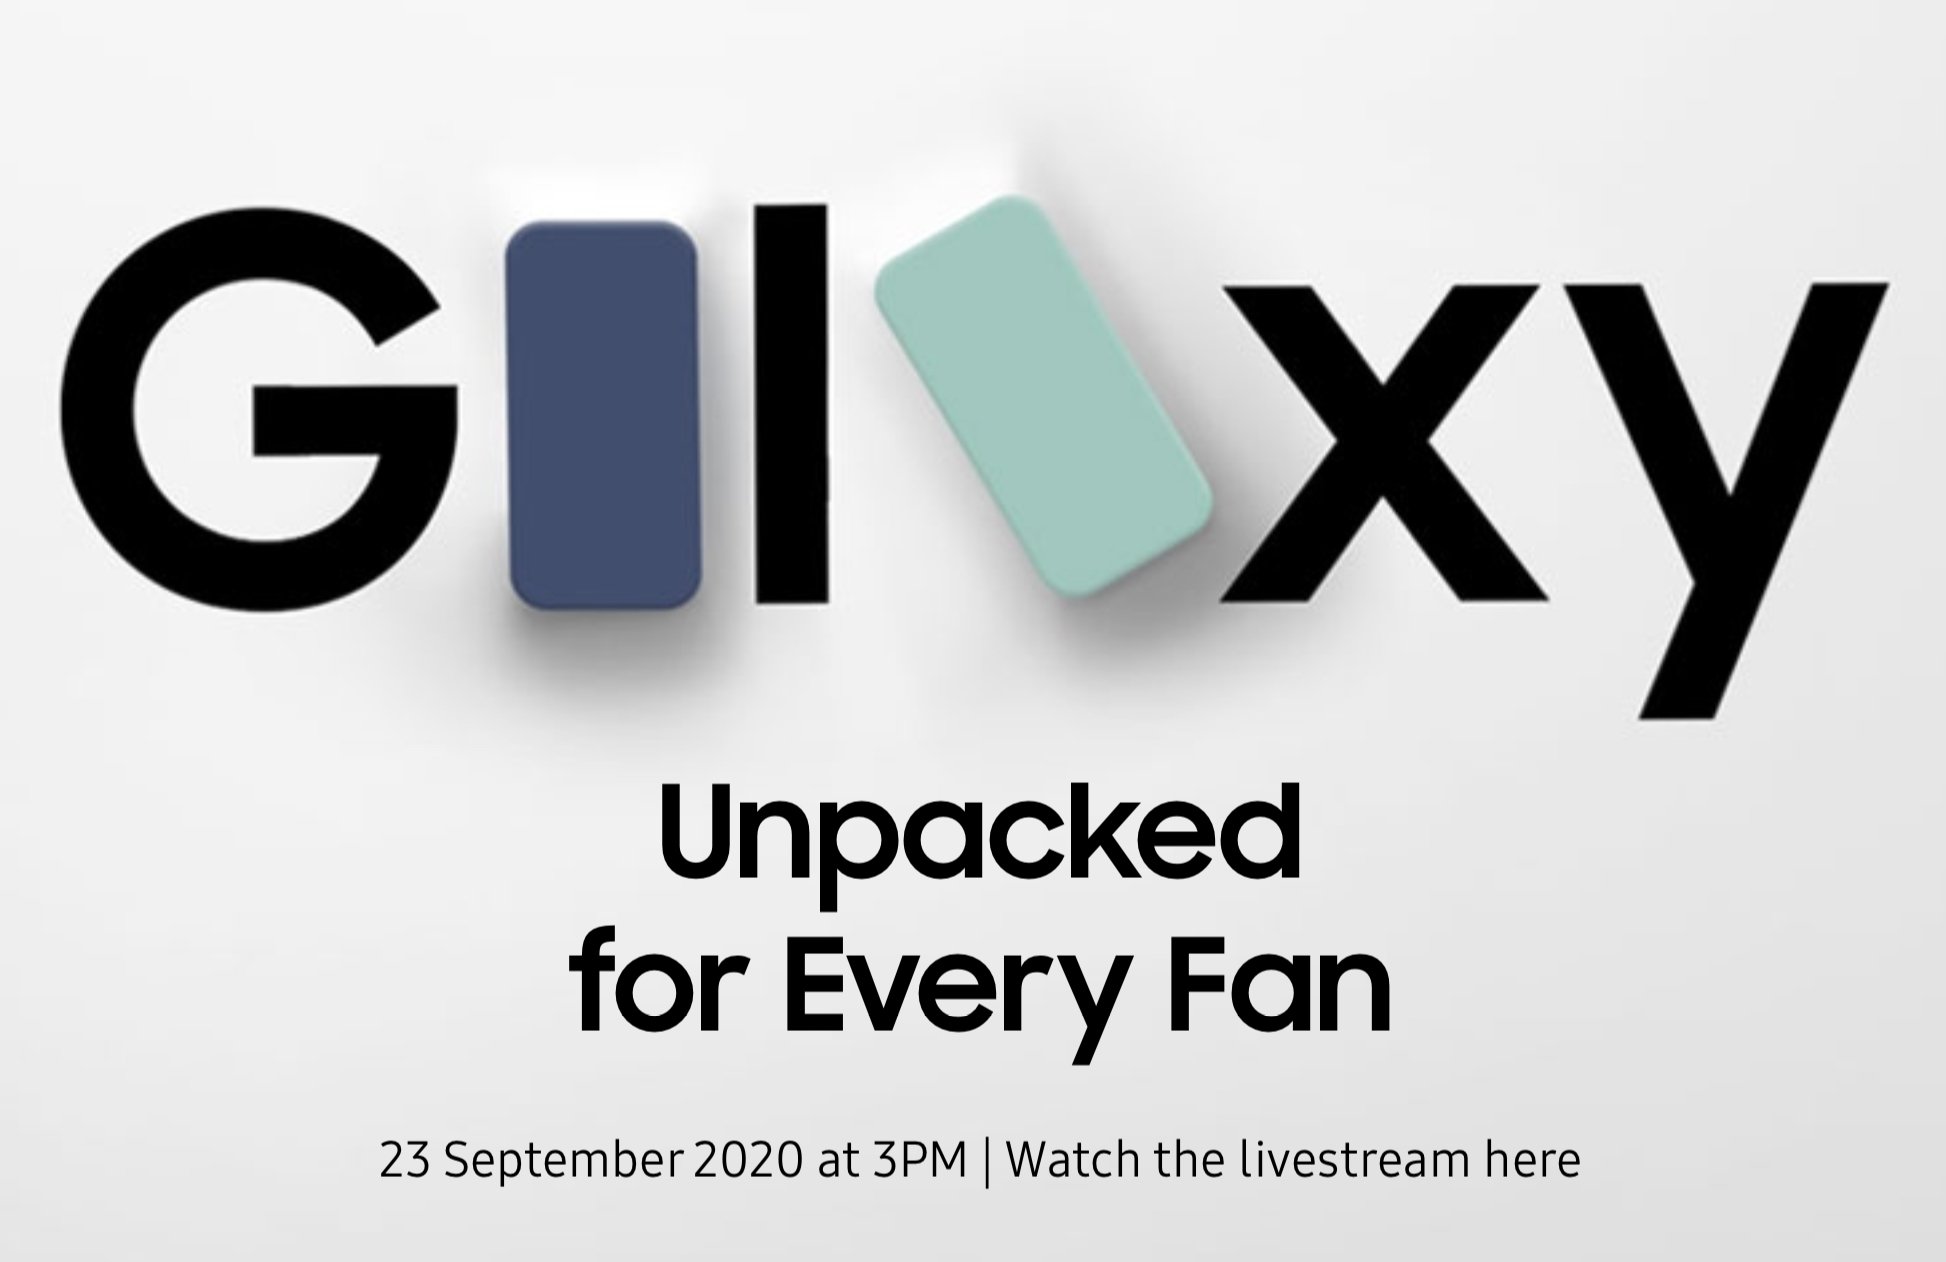 Samsung Galaxy S20 FE will launch on September 23